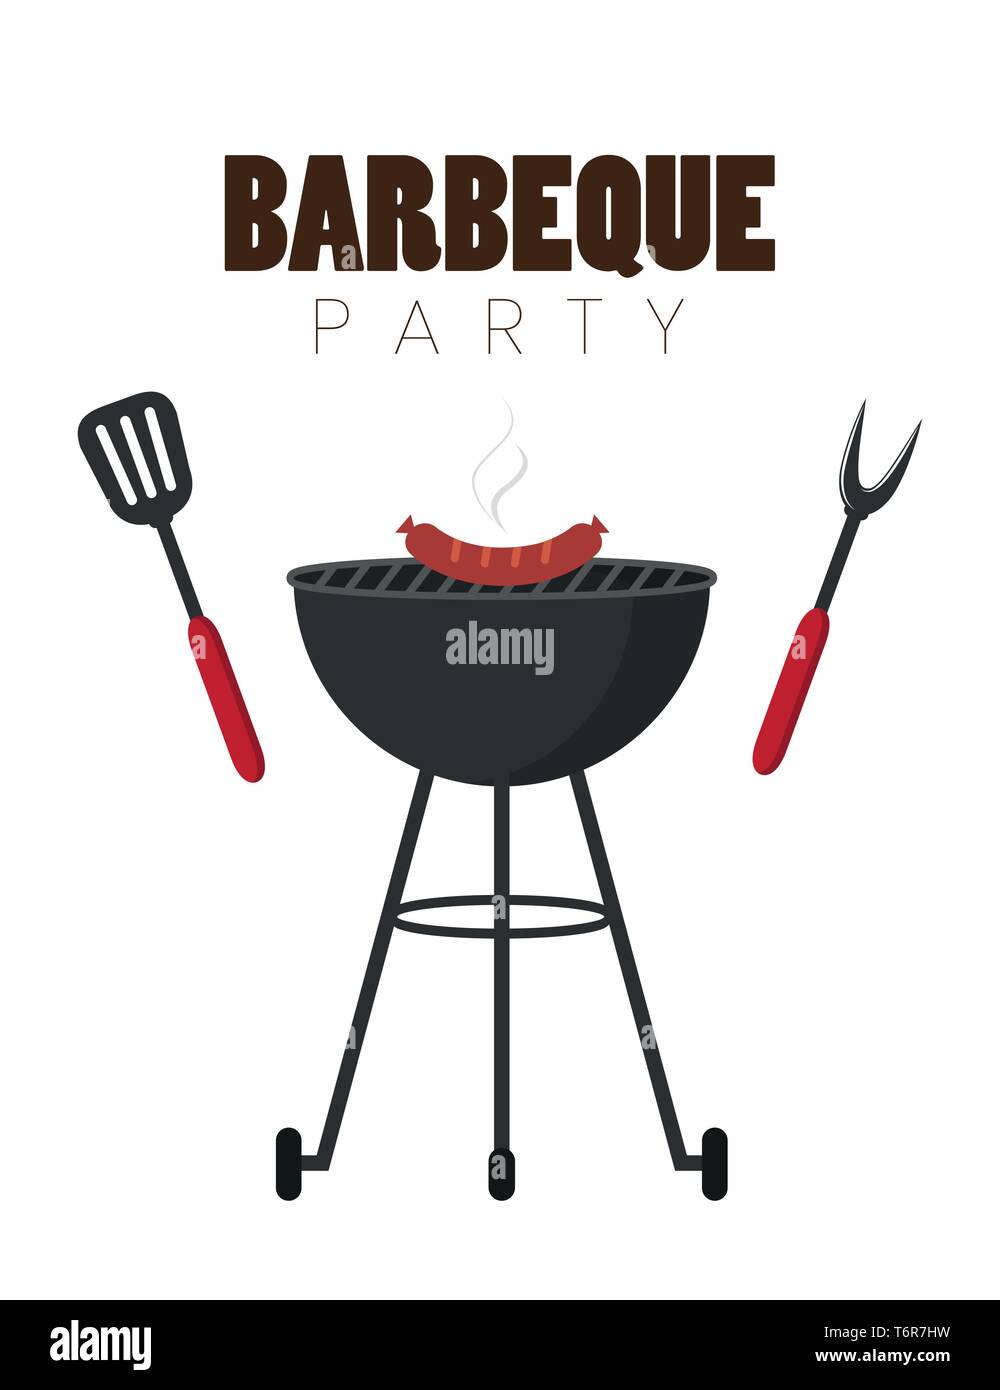 bbq party red kettle barbecue with sausages and grill cutlery vector illustration EPS10 Stock Vector